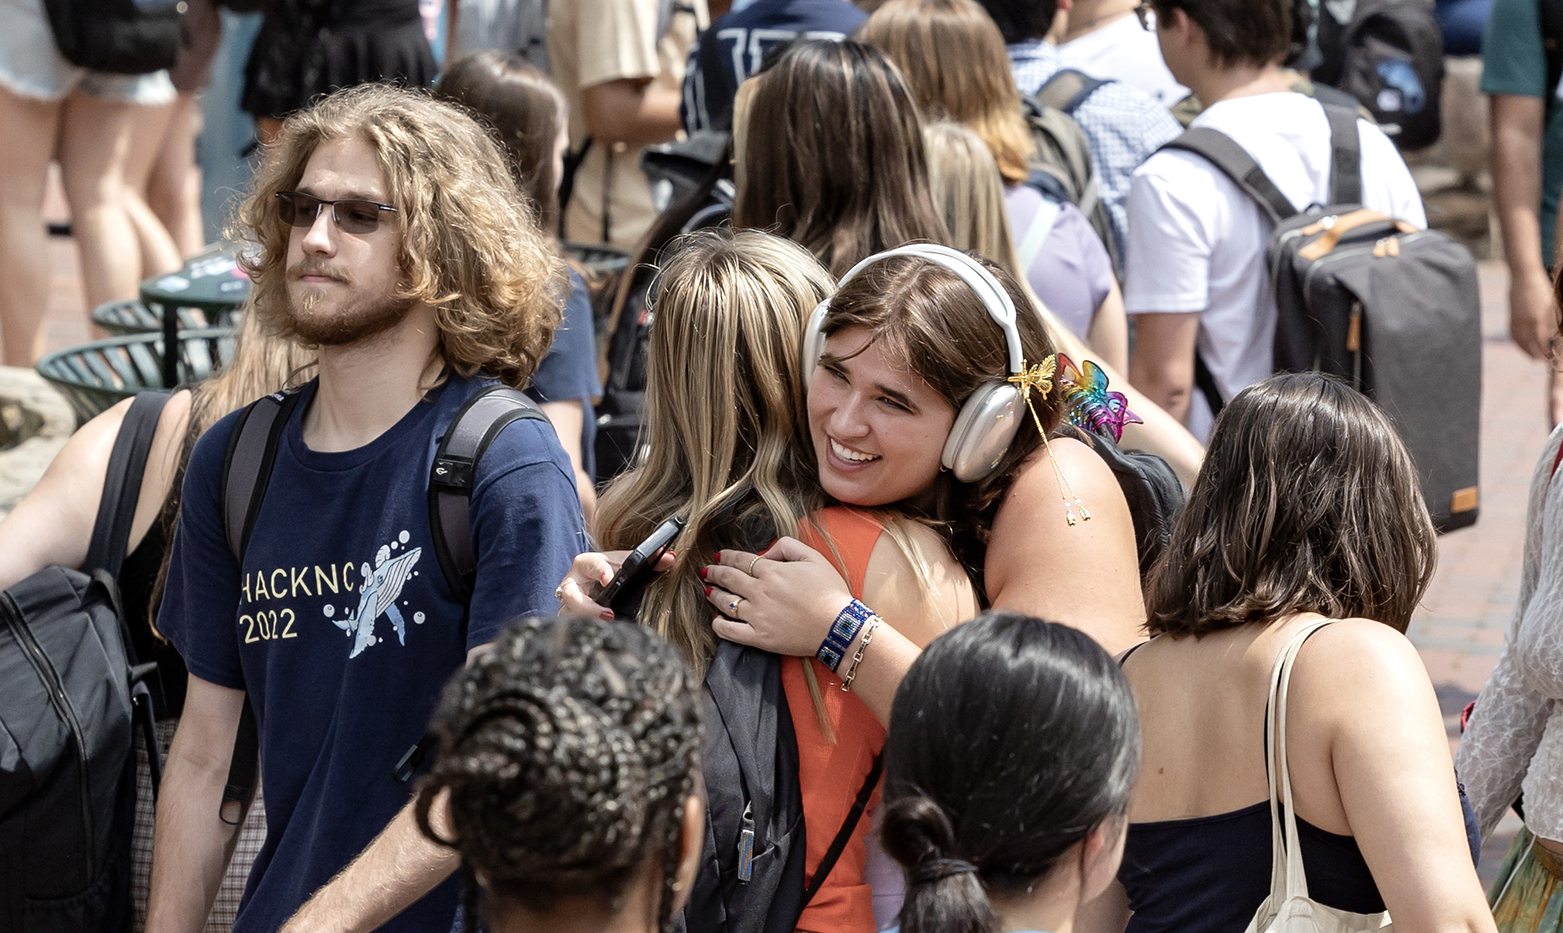 Two students hugging amongst a crowd of students on the campus of UNC-Chapel Hill.